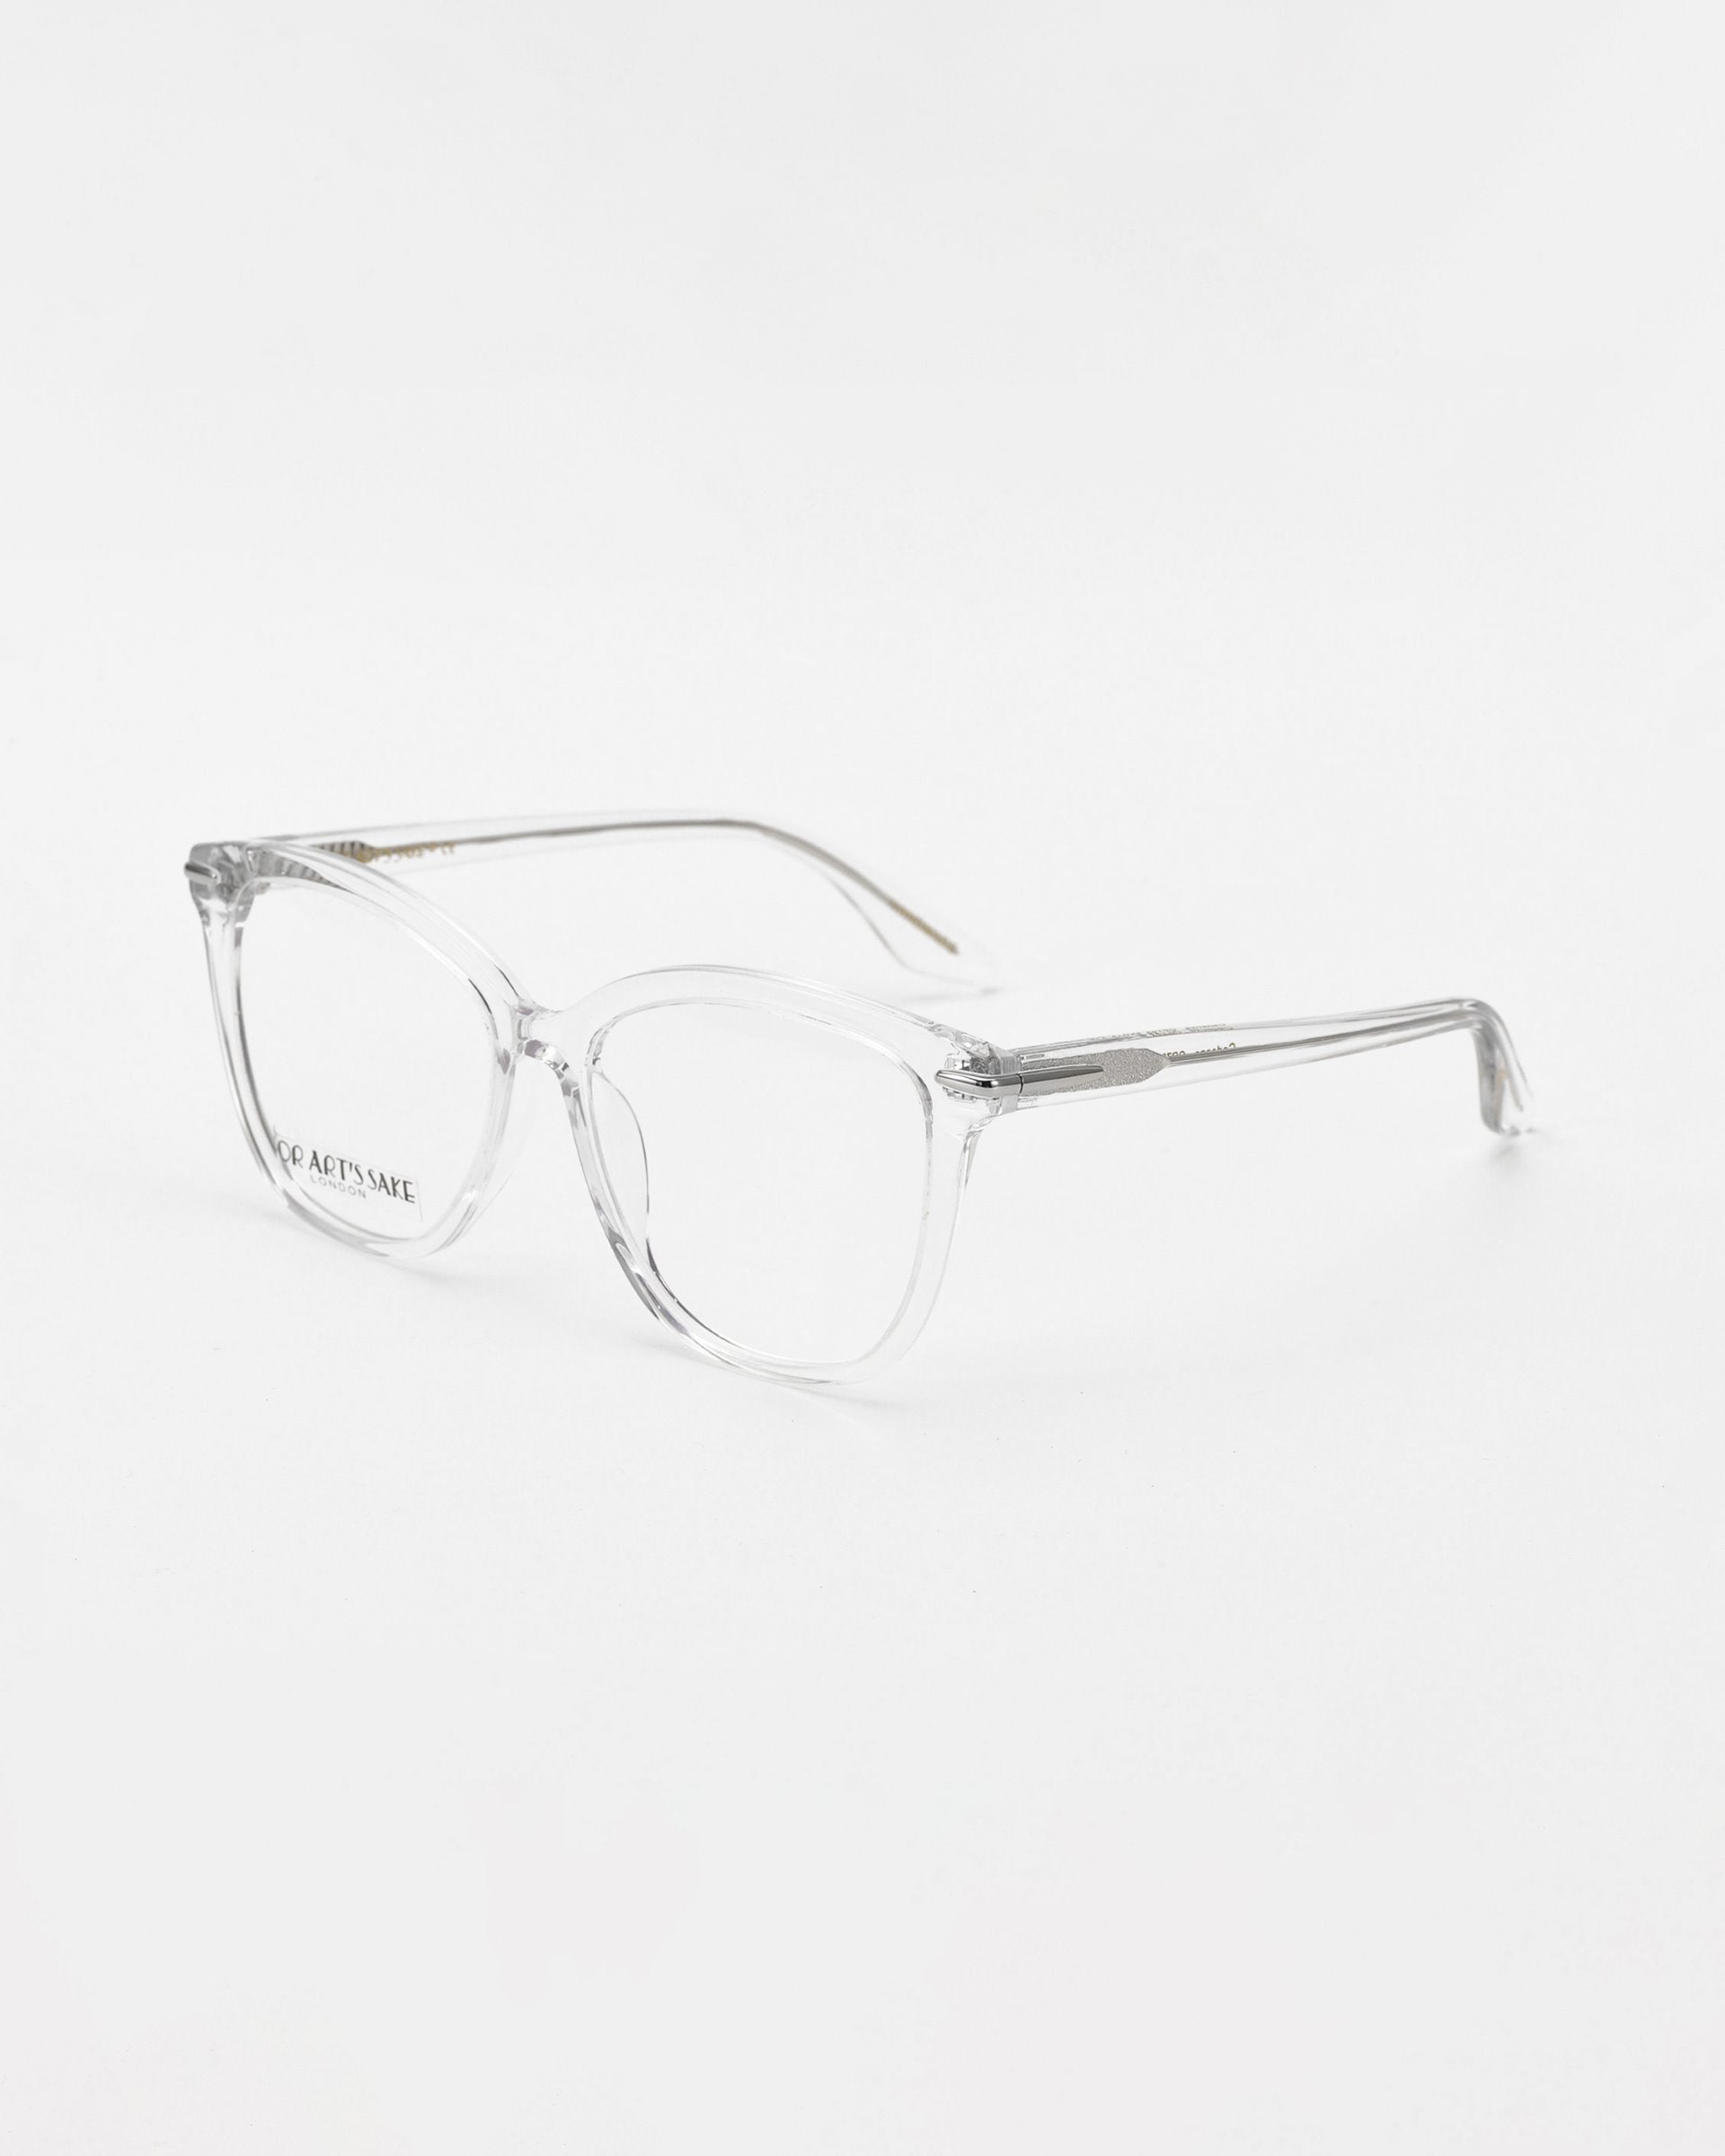 Clear, rectangular For Art&#39;s Sake® Cadenza optical glasses with transparent frames on a white background. The glasses have a simple and minimalist design, with sleek, thin, and unobtrusive arms.